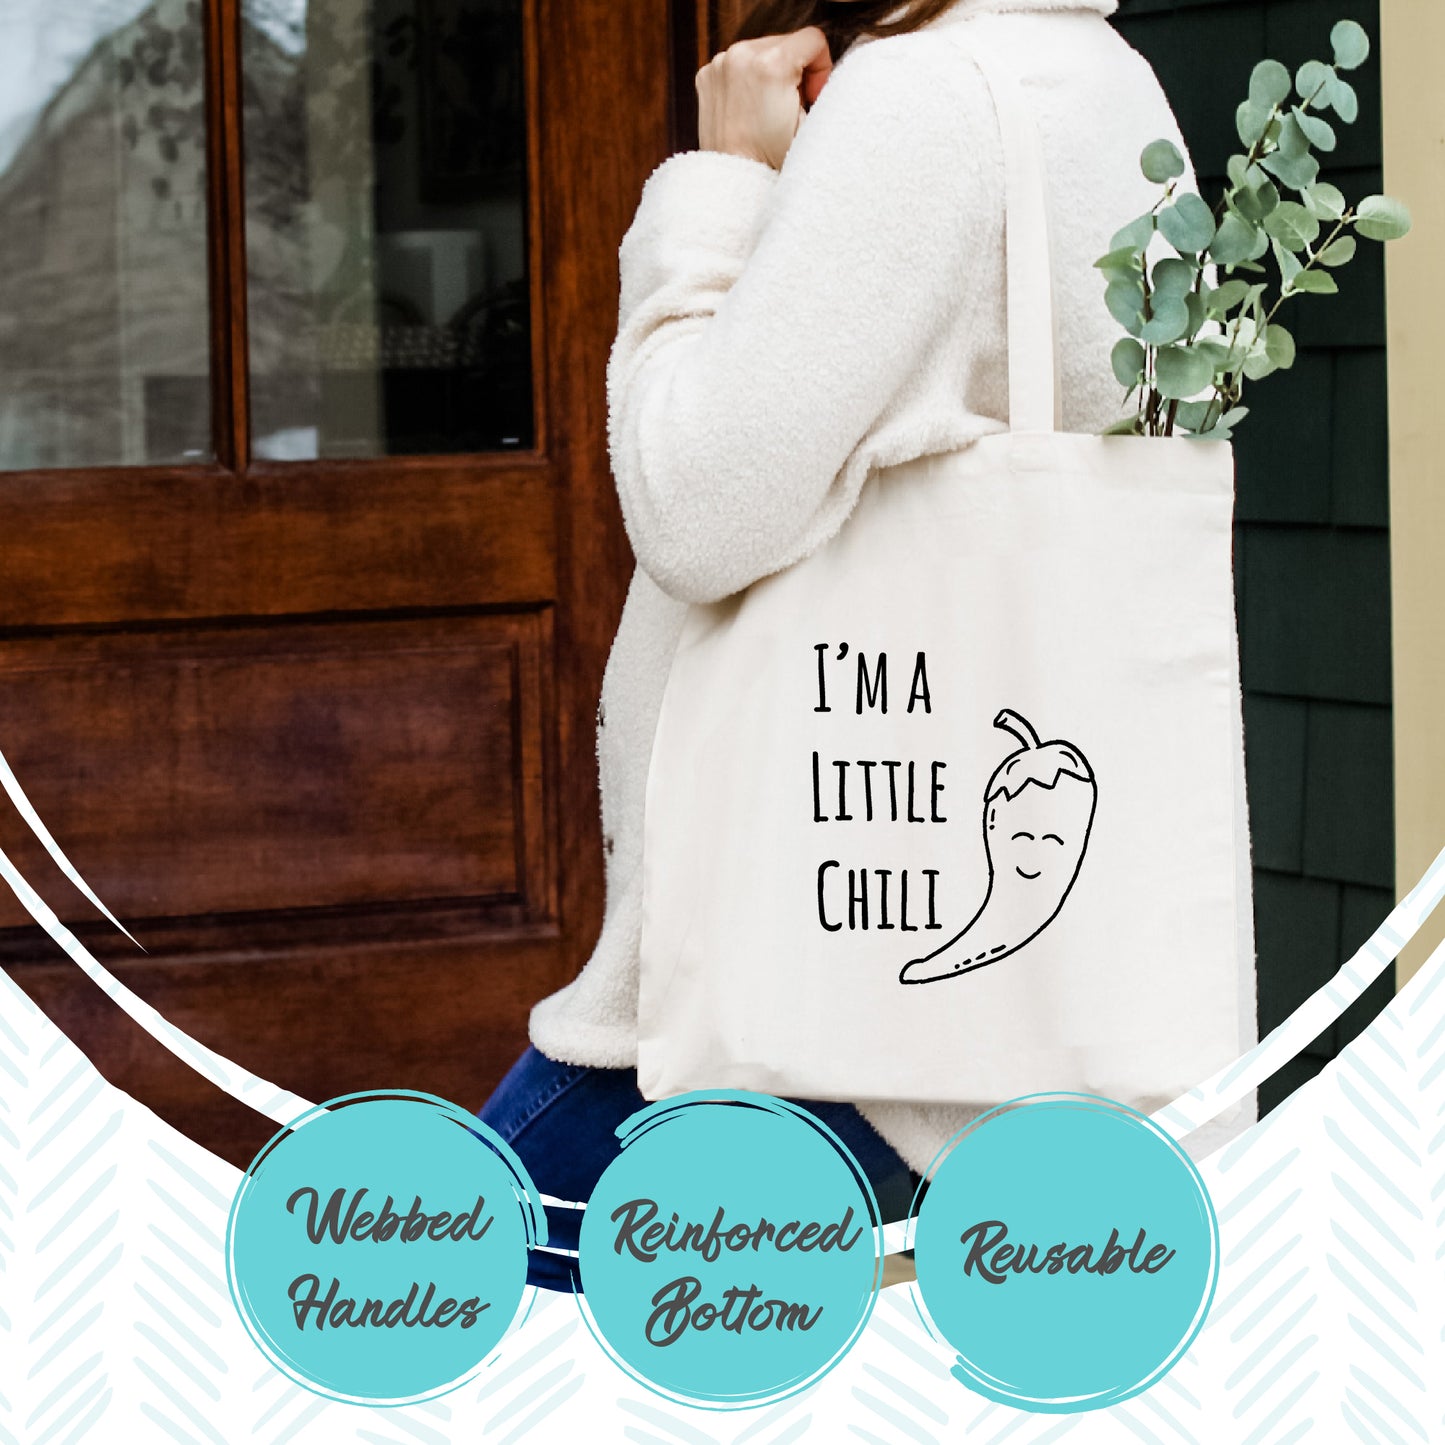 Fold In The Cheese - Tote Bag - MoonlightMakers